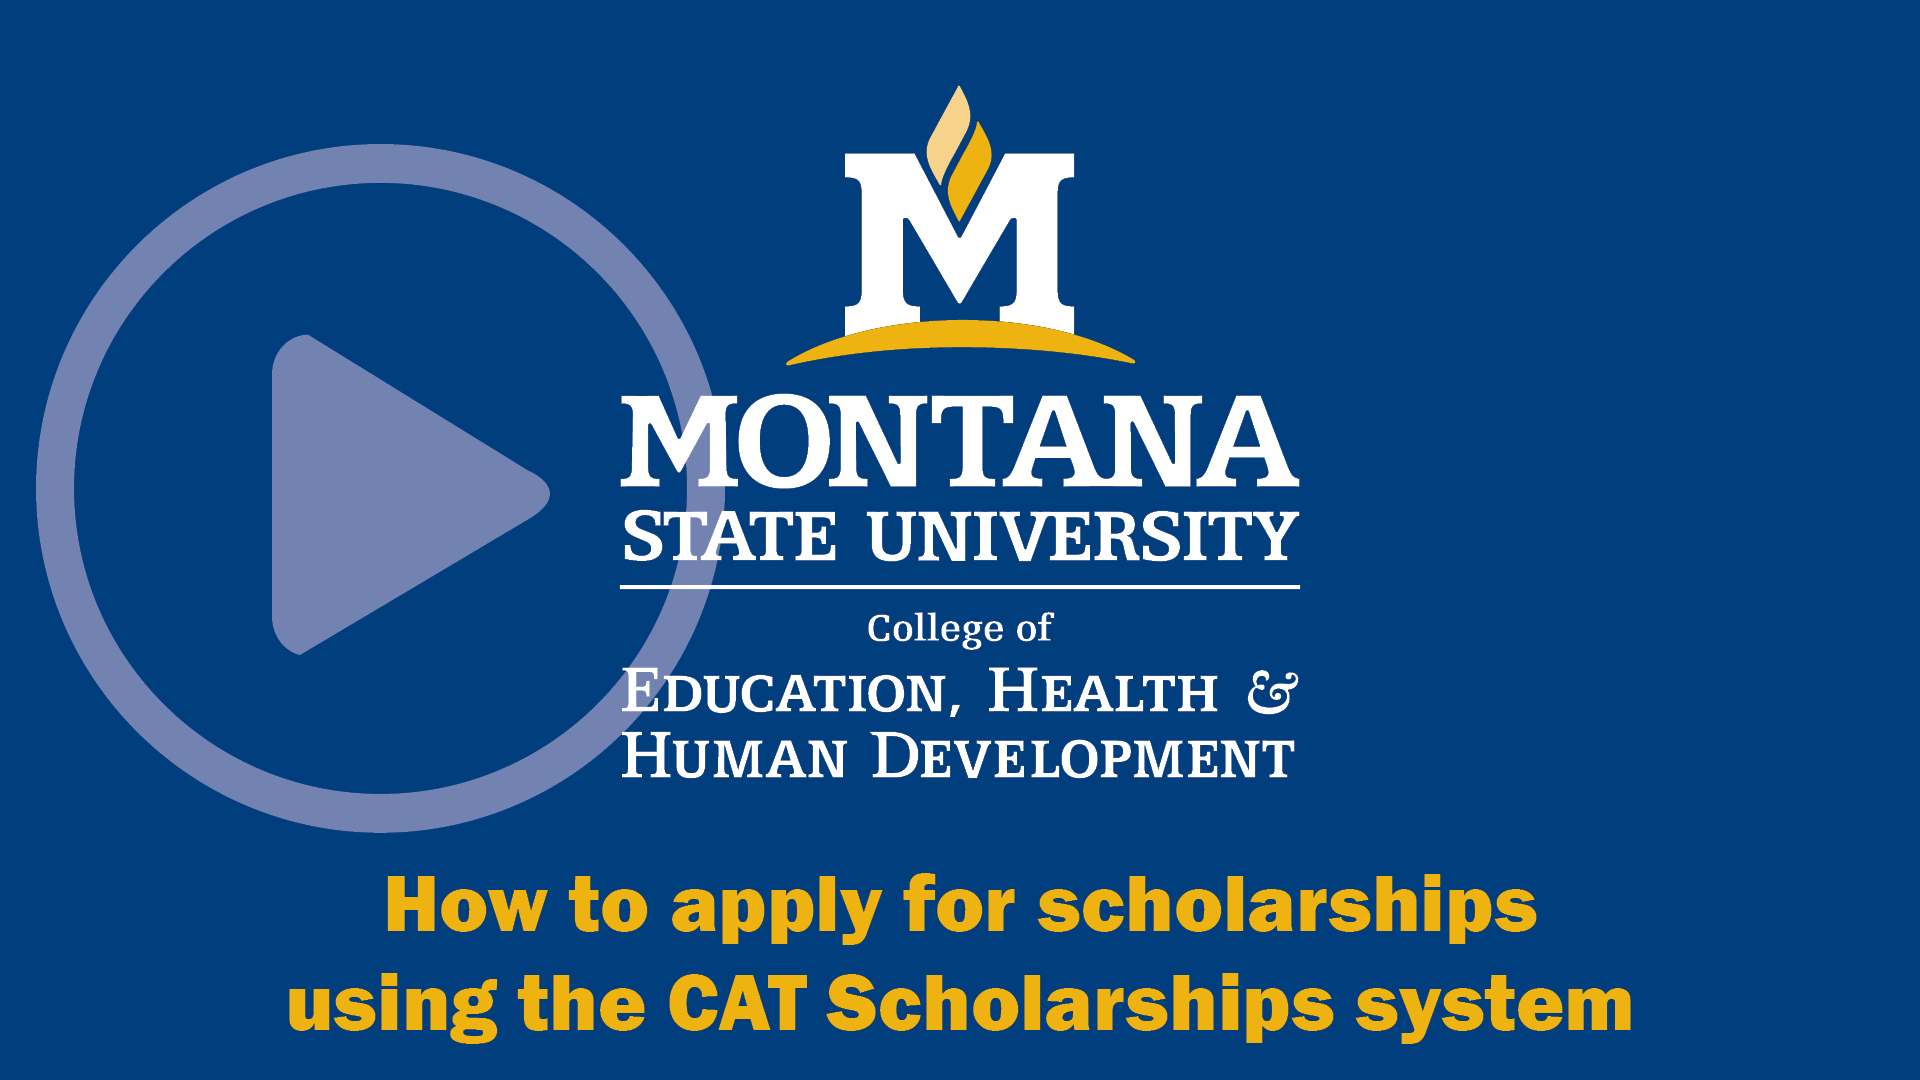 Video of Cat Scholarships Application Process